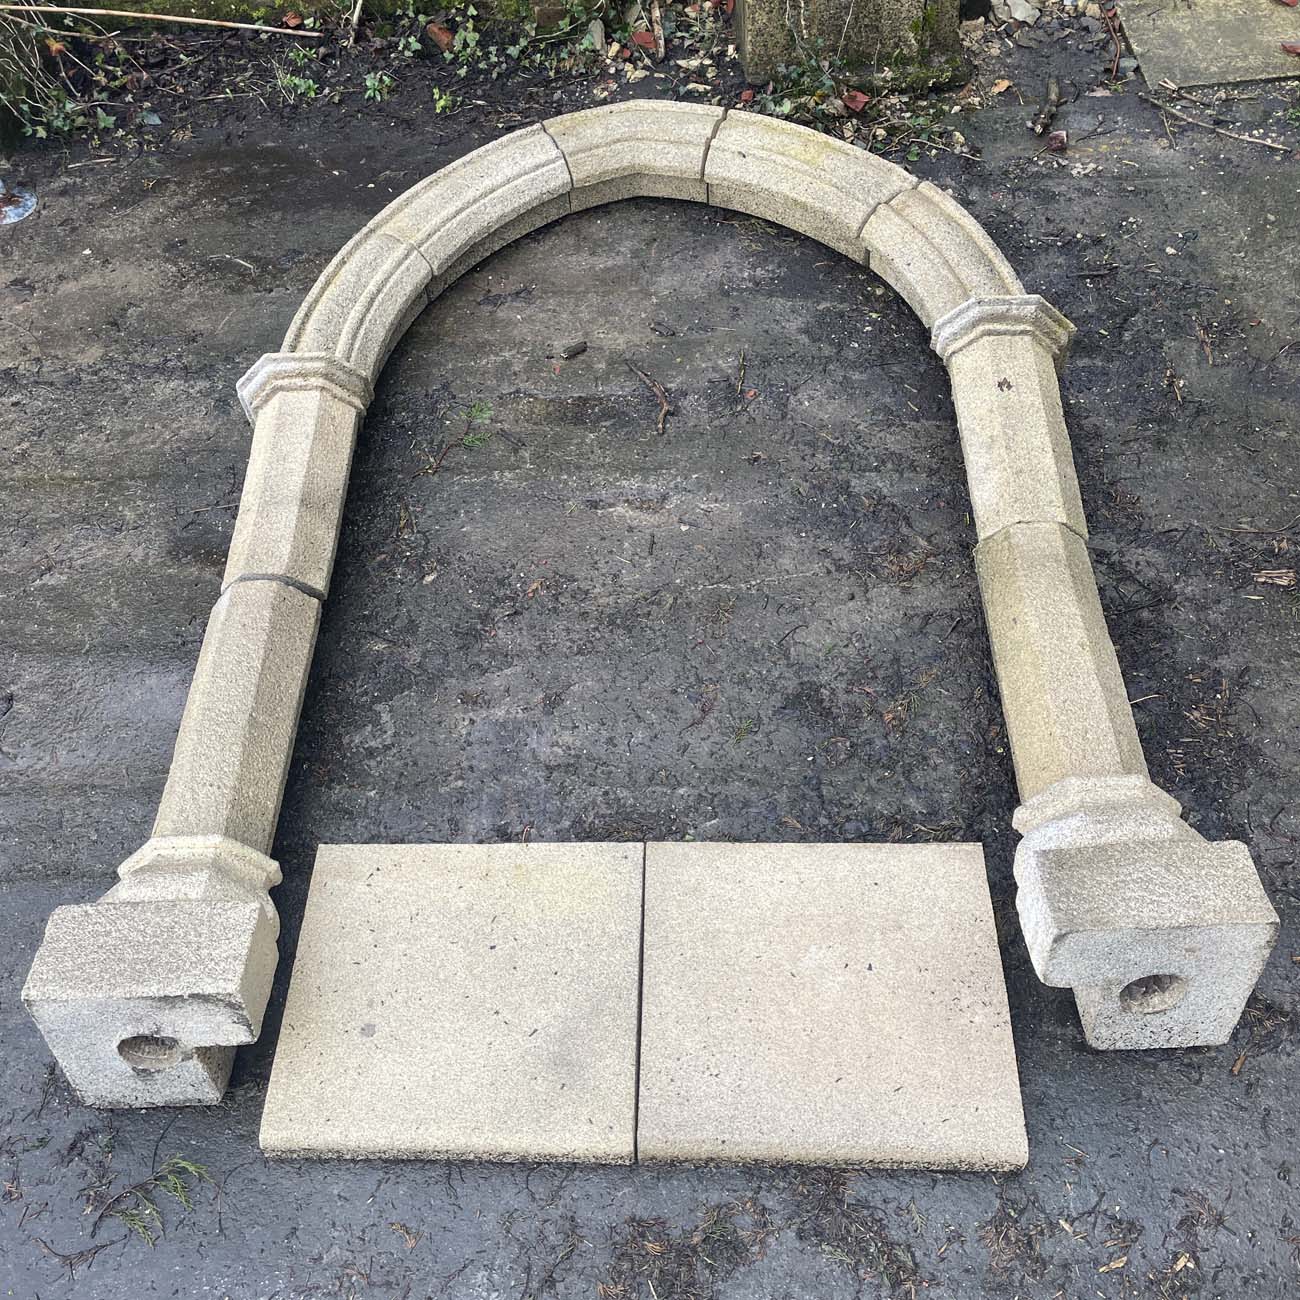 Rebated Large Gothic Arch with threshold